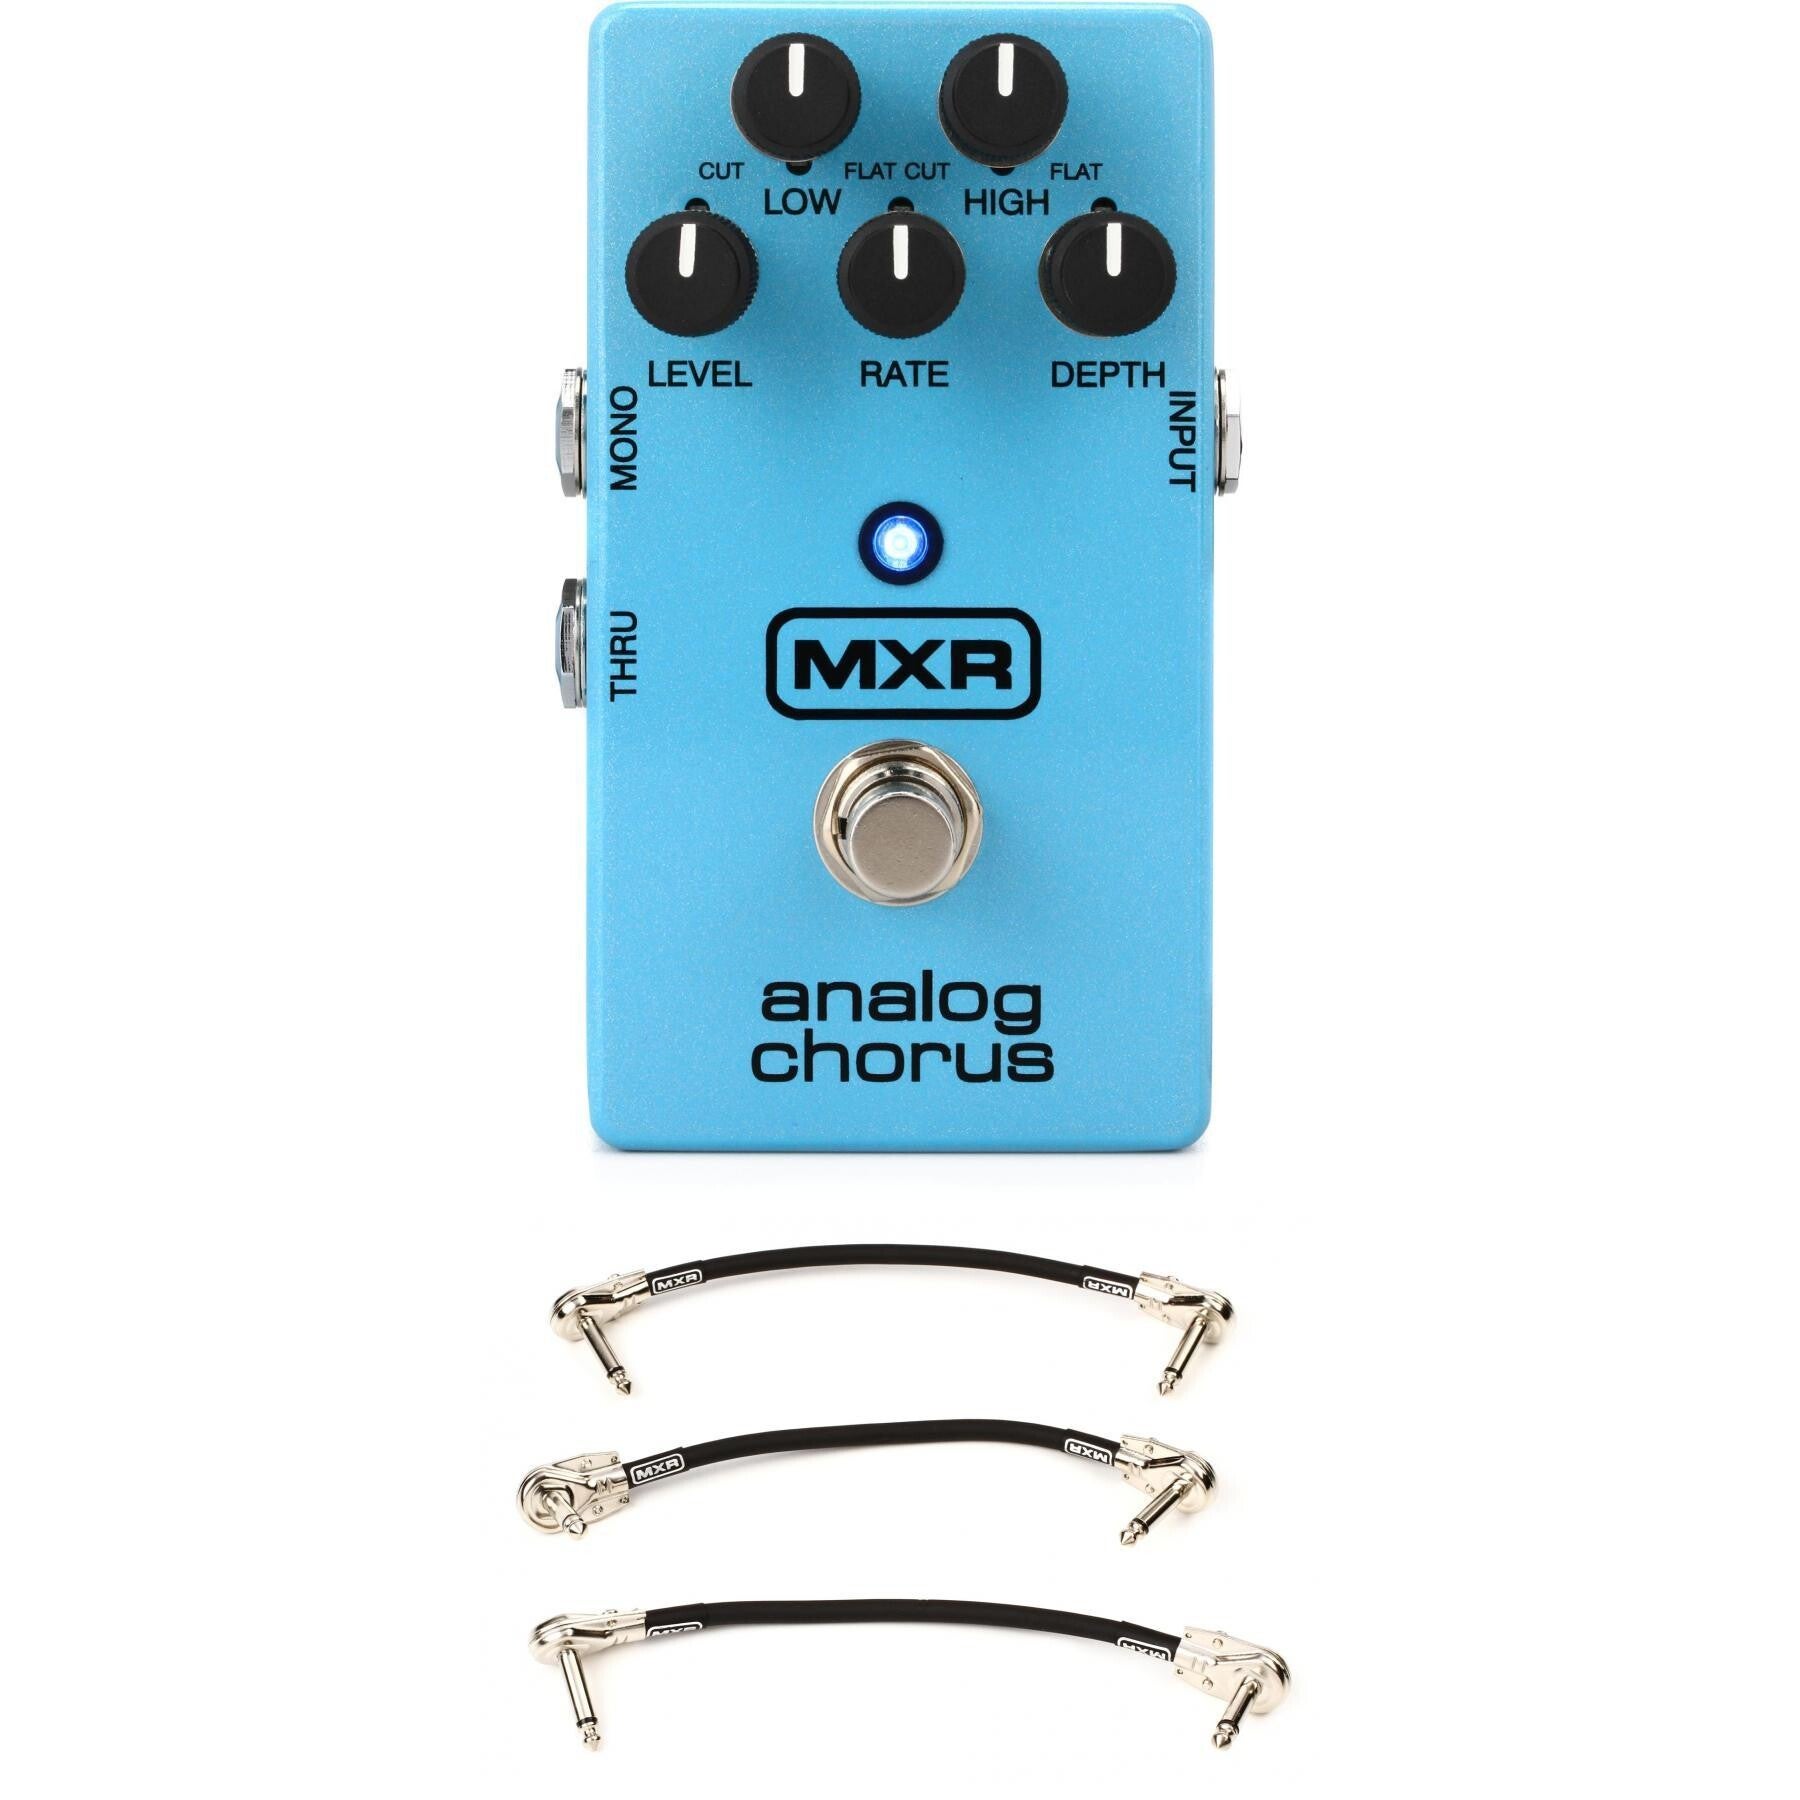 MXR M234 Analog Chorus Pedal with 3 Patch Cables | Sweetwater